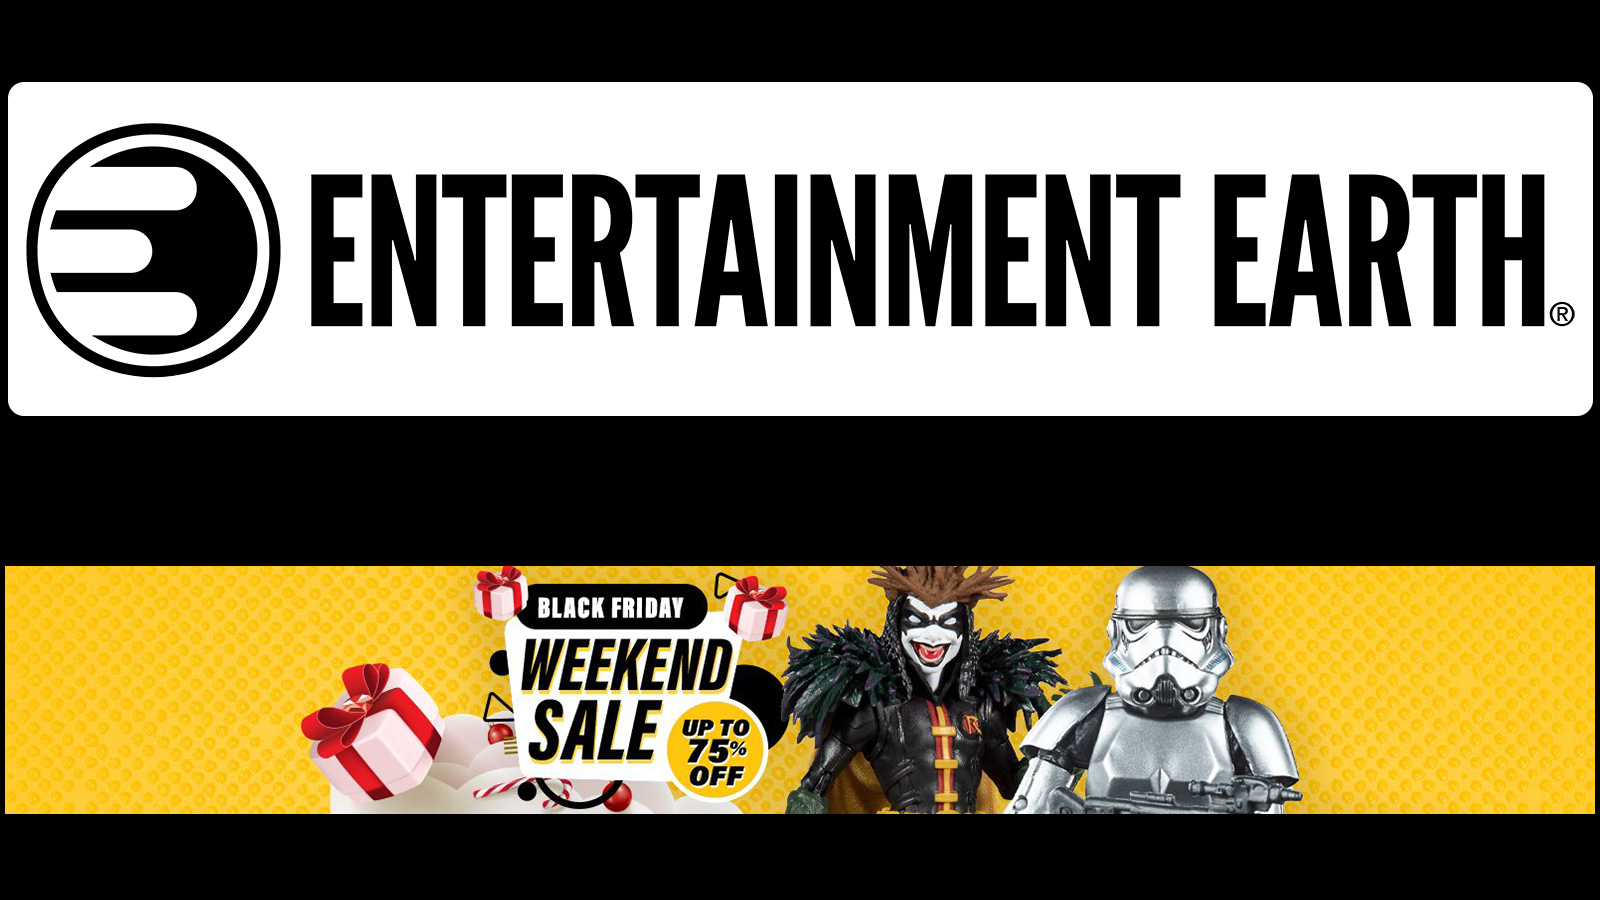 Entertainment Earth Black Friday Weekend Sale - Up To 75% Off